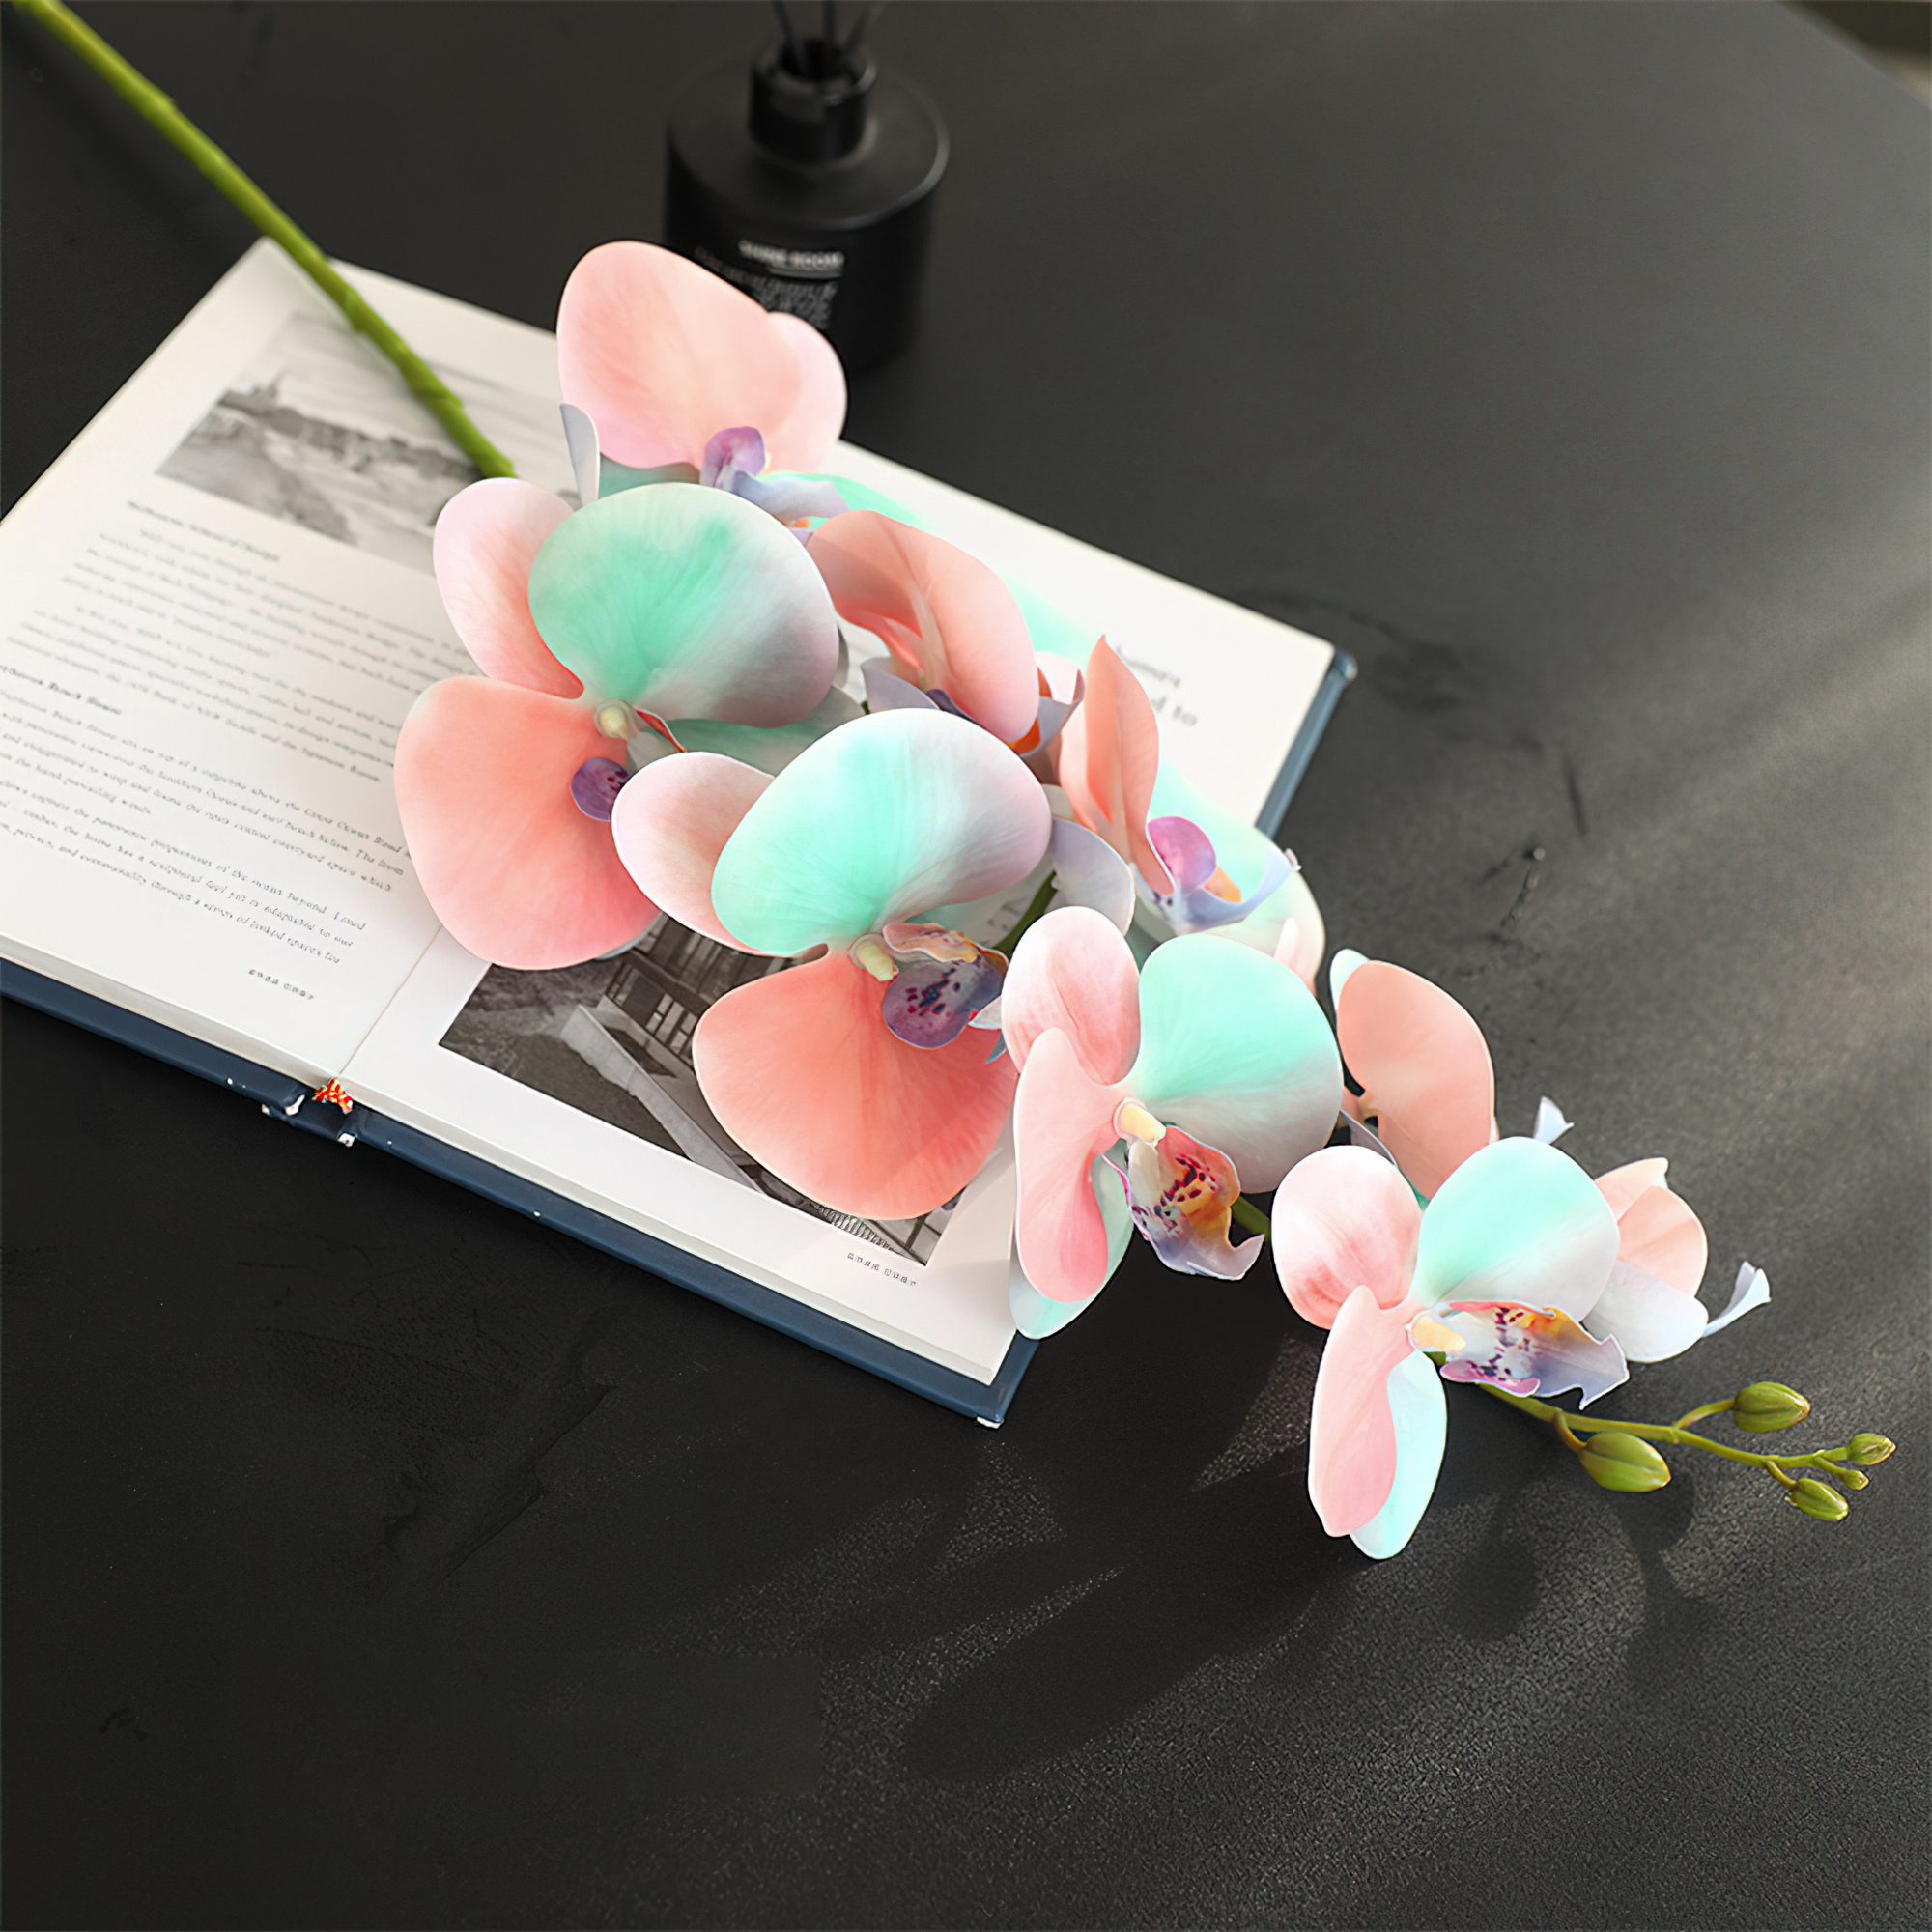 ValarFlower Personalized 3D Printed Multicolor Orchids, 9-Heads Phalaenopsis Arrangement for Wedding and Home Decor Accent Gifts